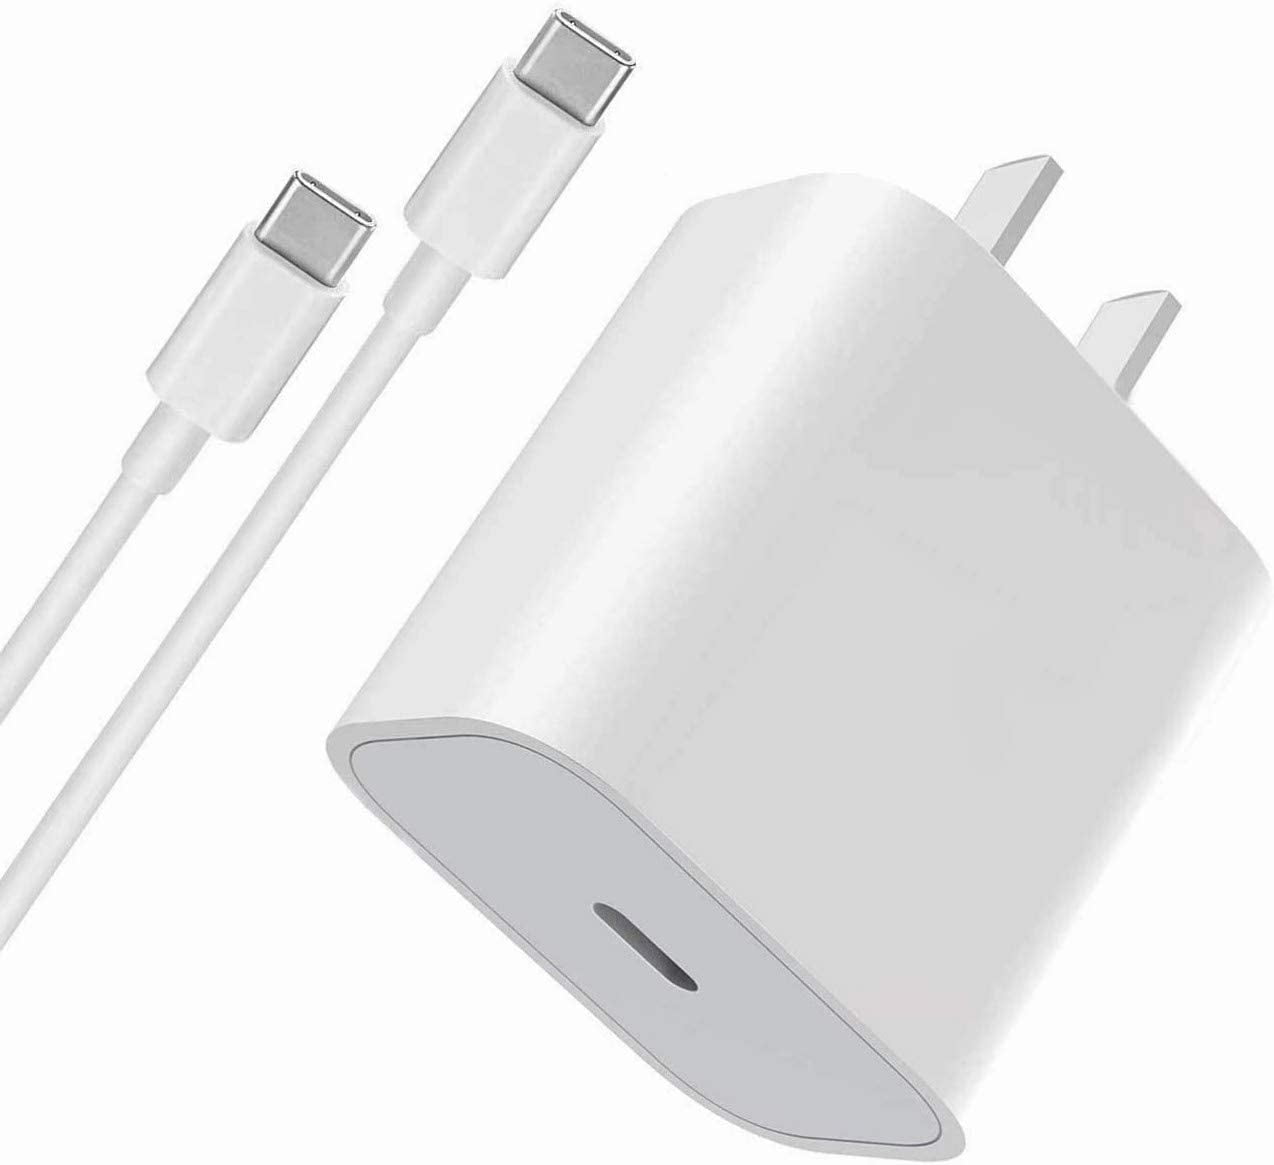 6th generation Wall AC Home Charger+3ft USB Cord Cable for Apple iPad 9.7 2018 